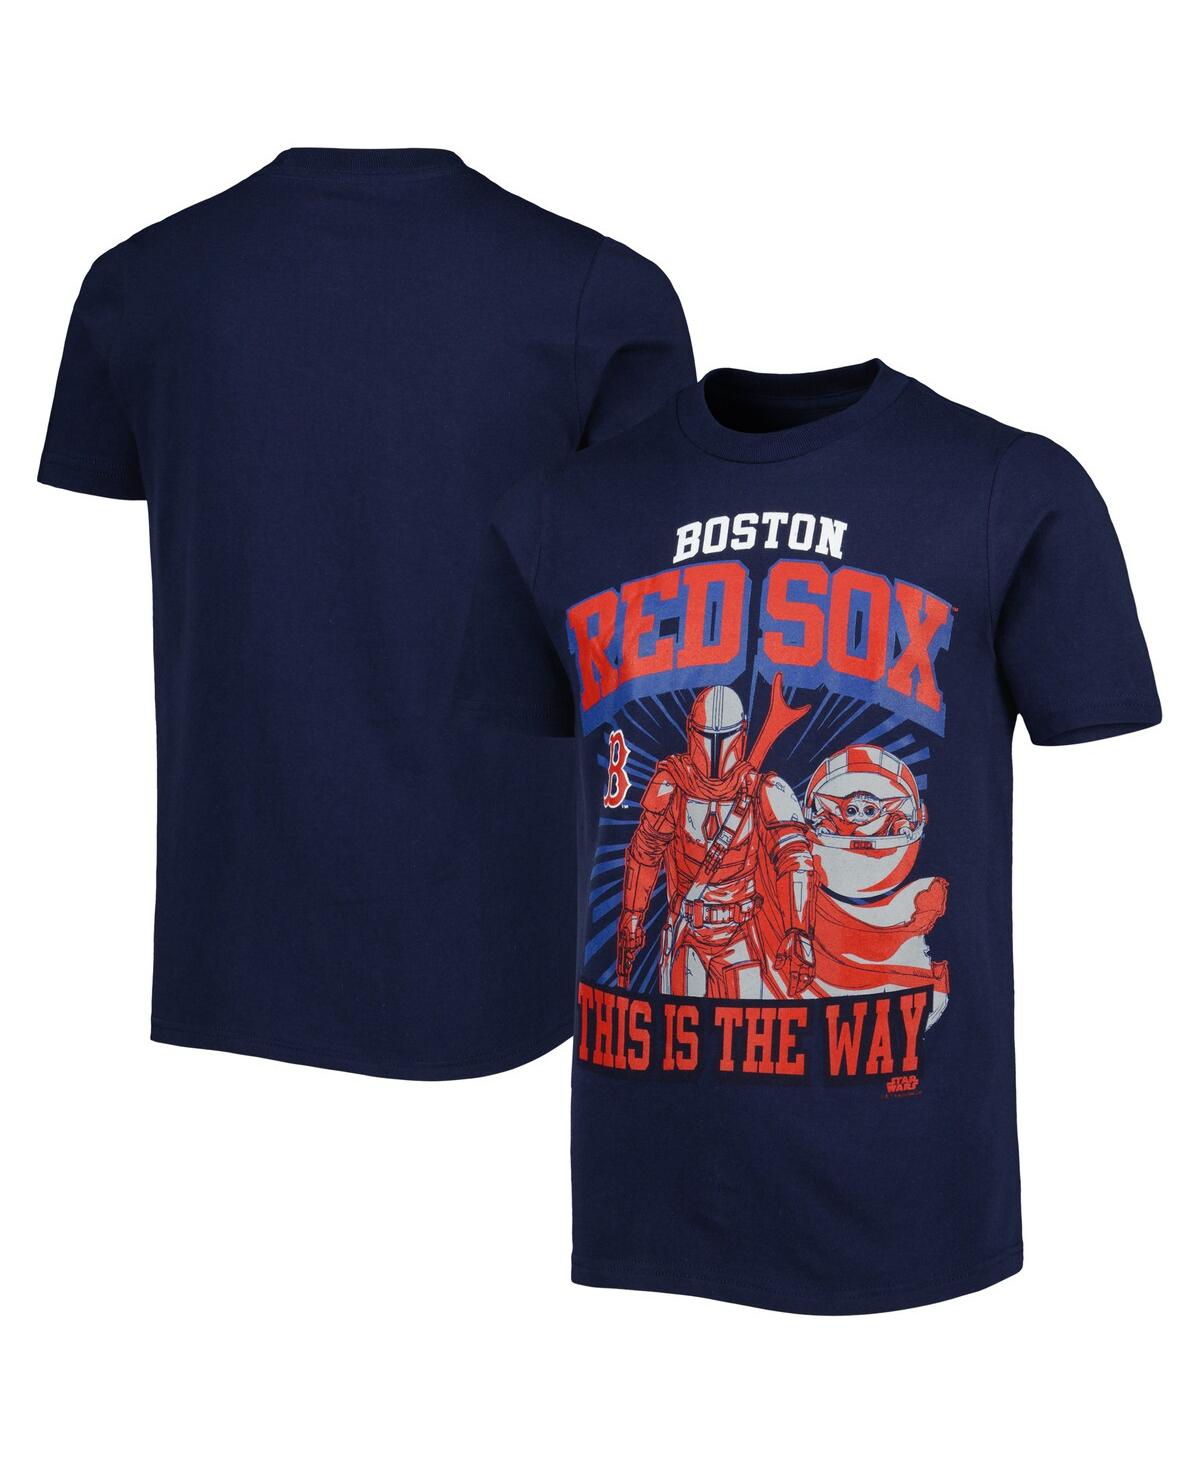 Shop Outerstuff Big Boys And Girls Navy Boston Red Sox Star Wars This Is The Way T-shirt